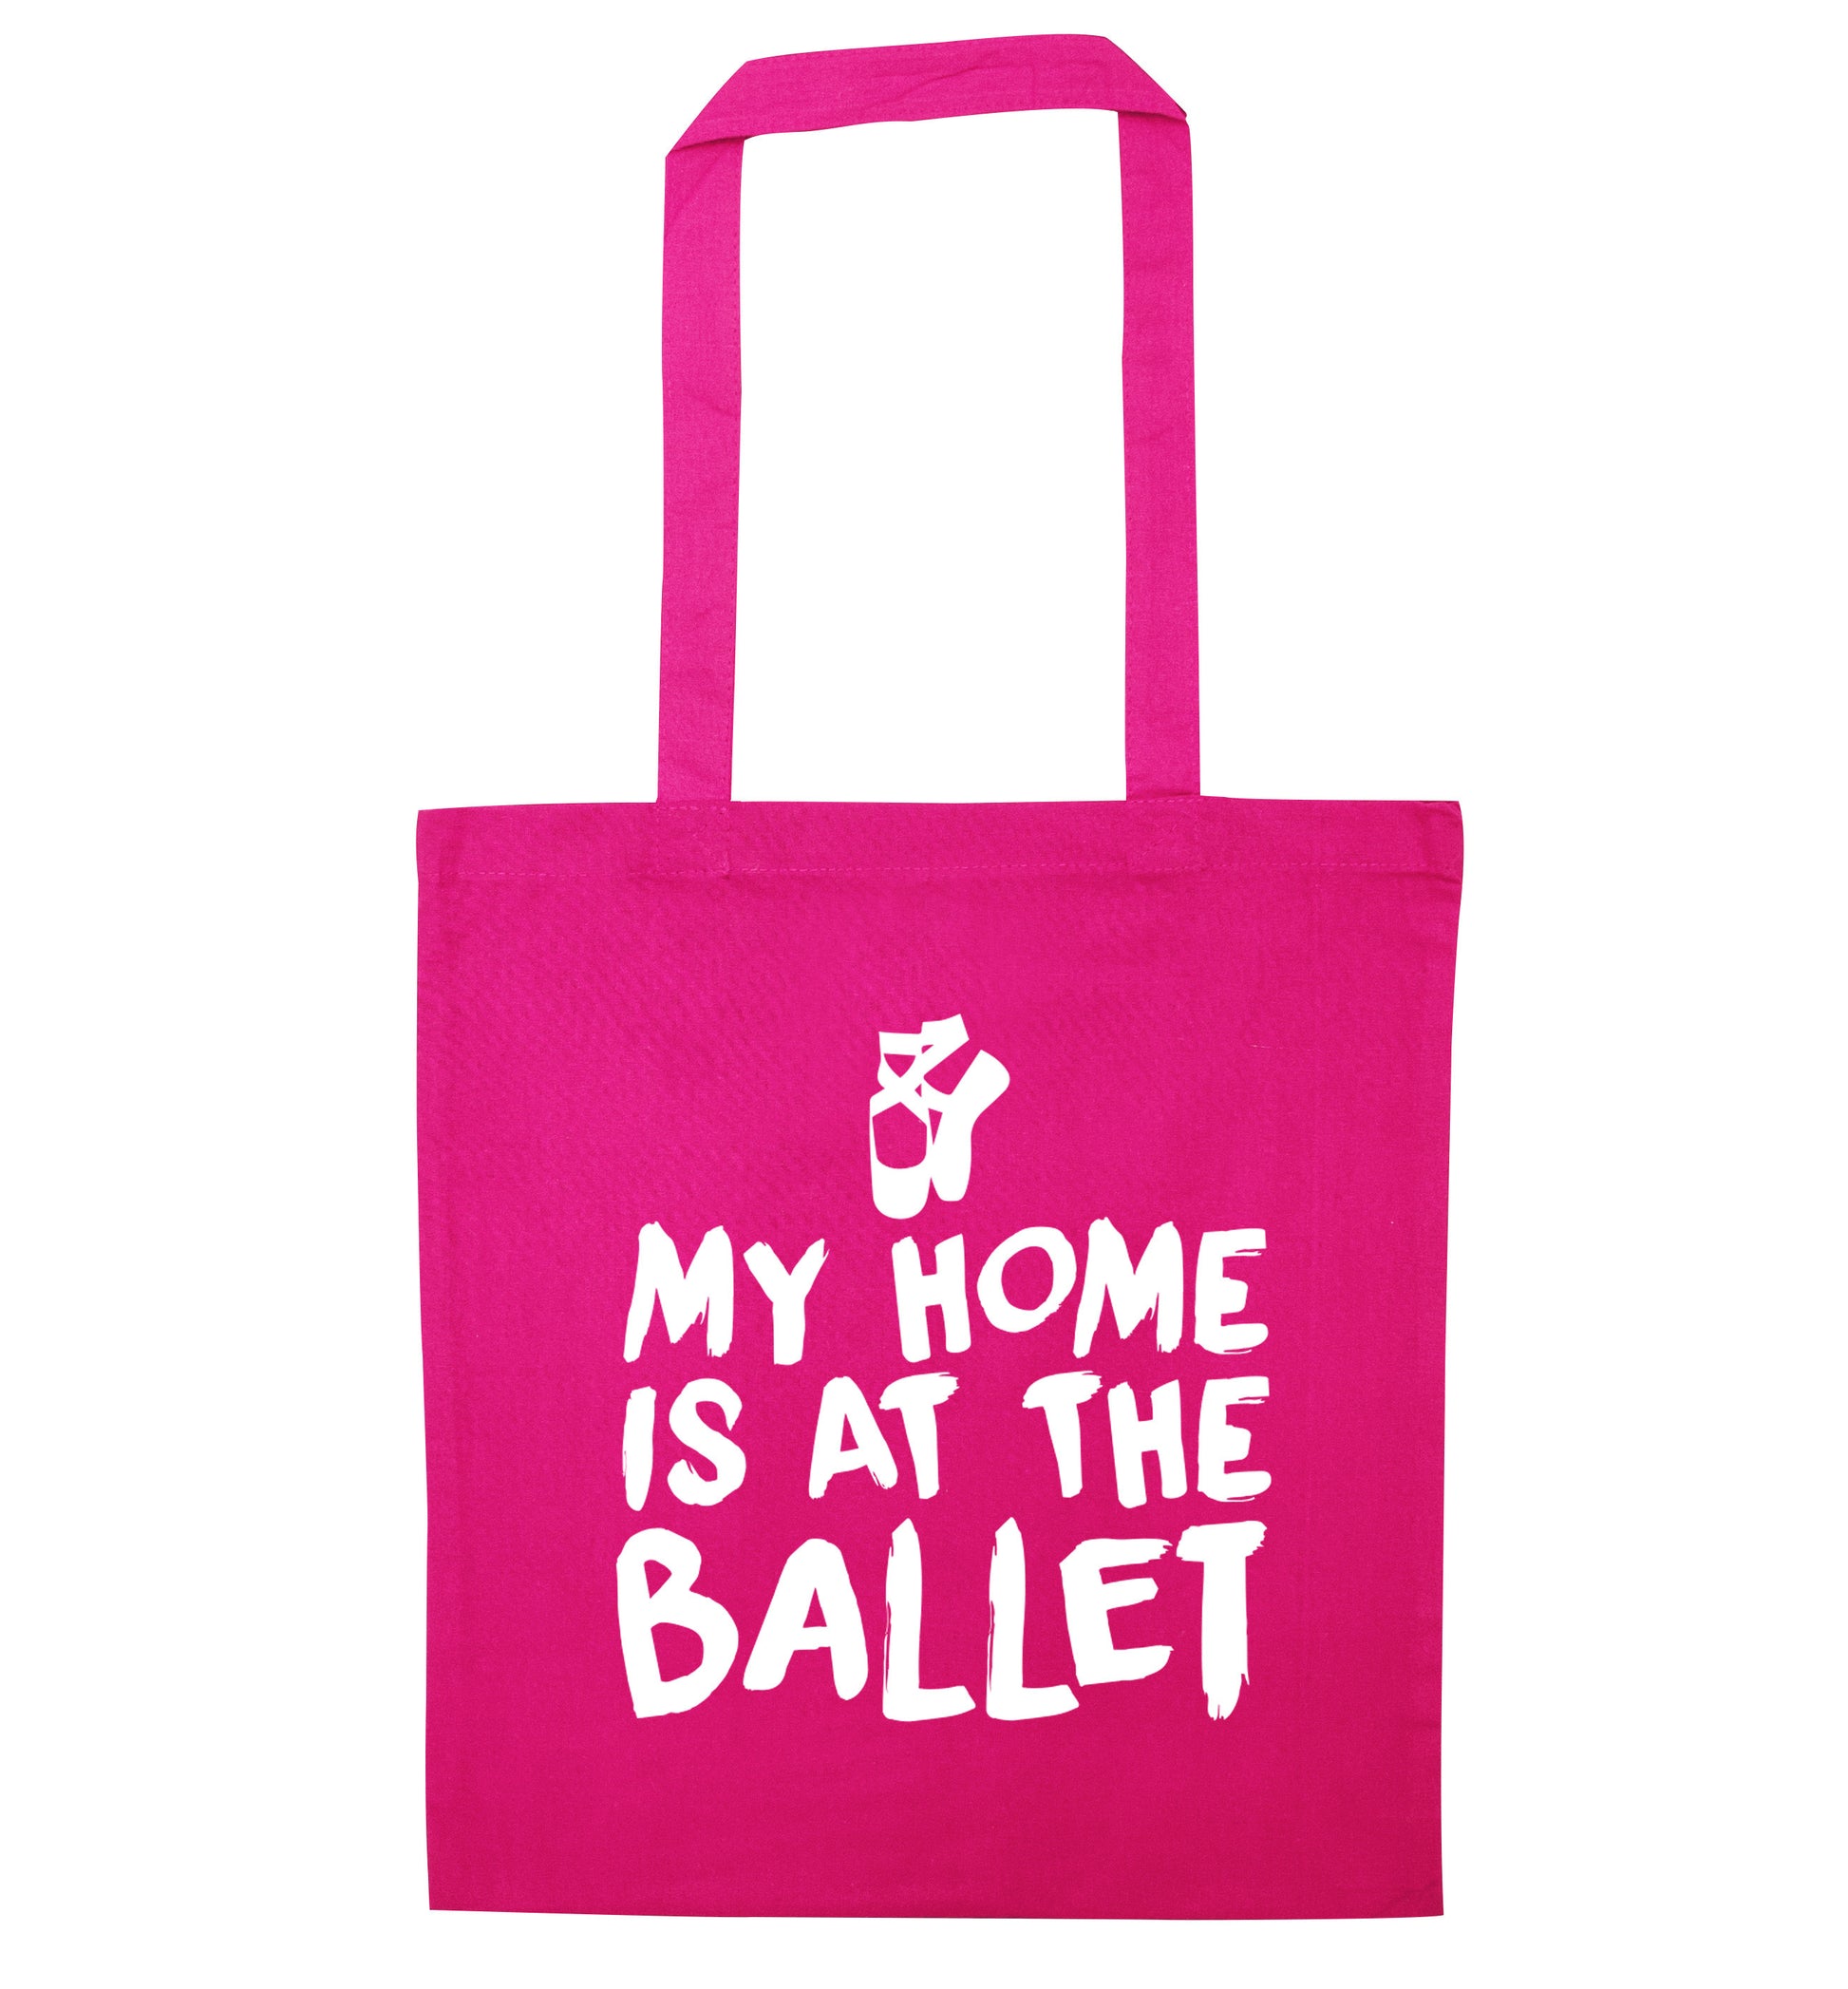 My home is at the ballet pink tote bag